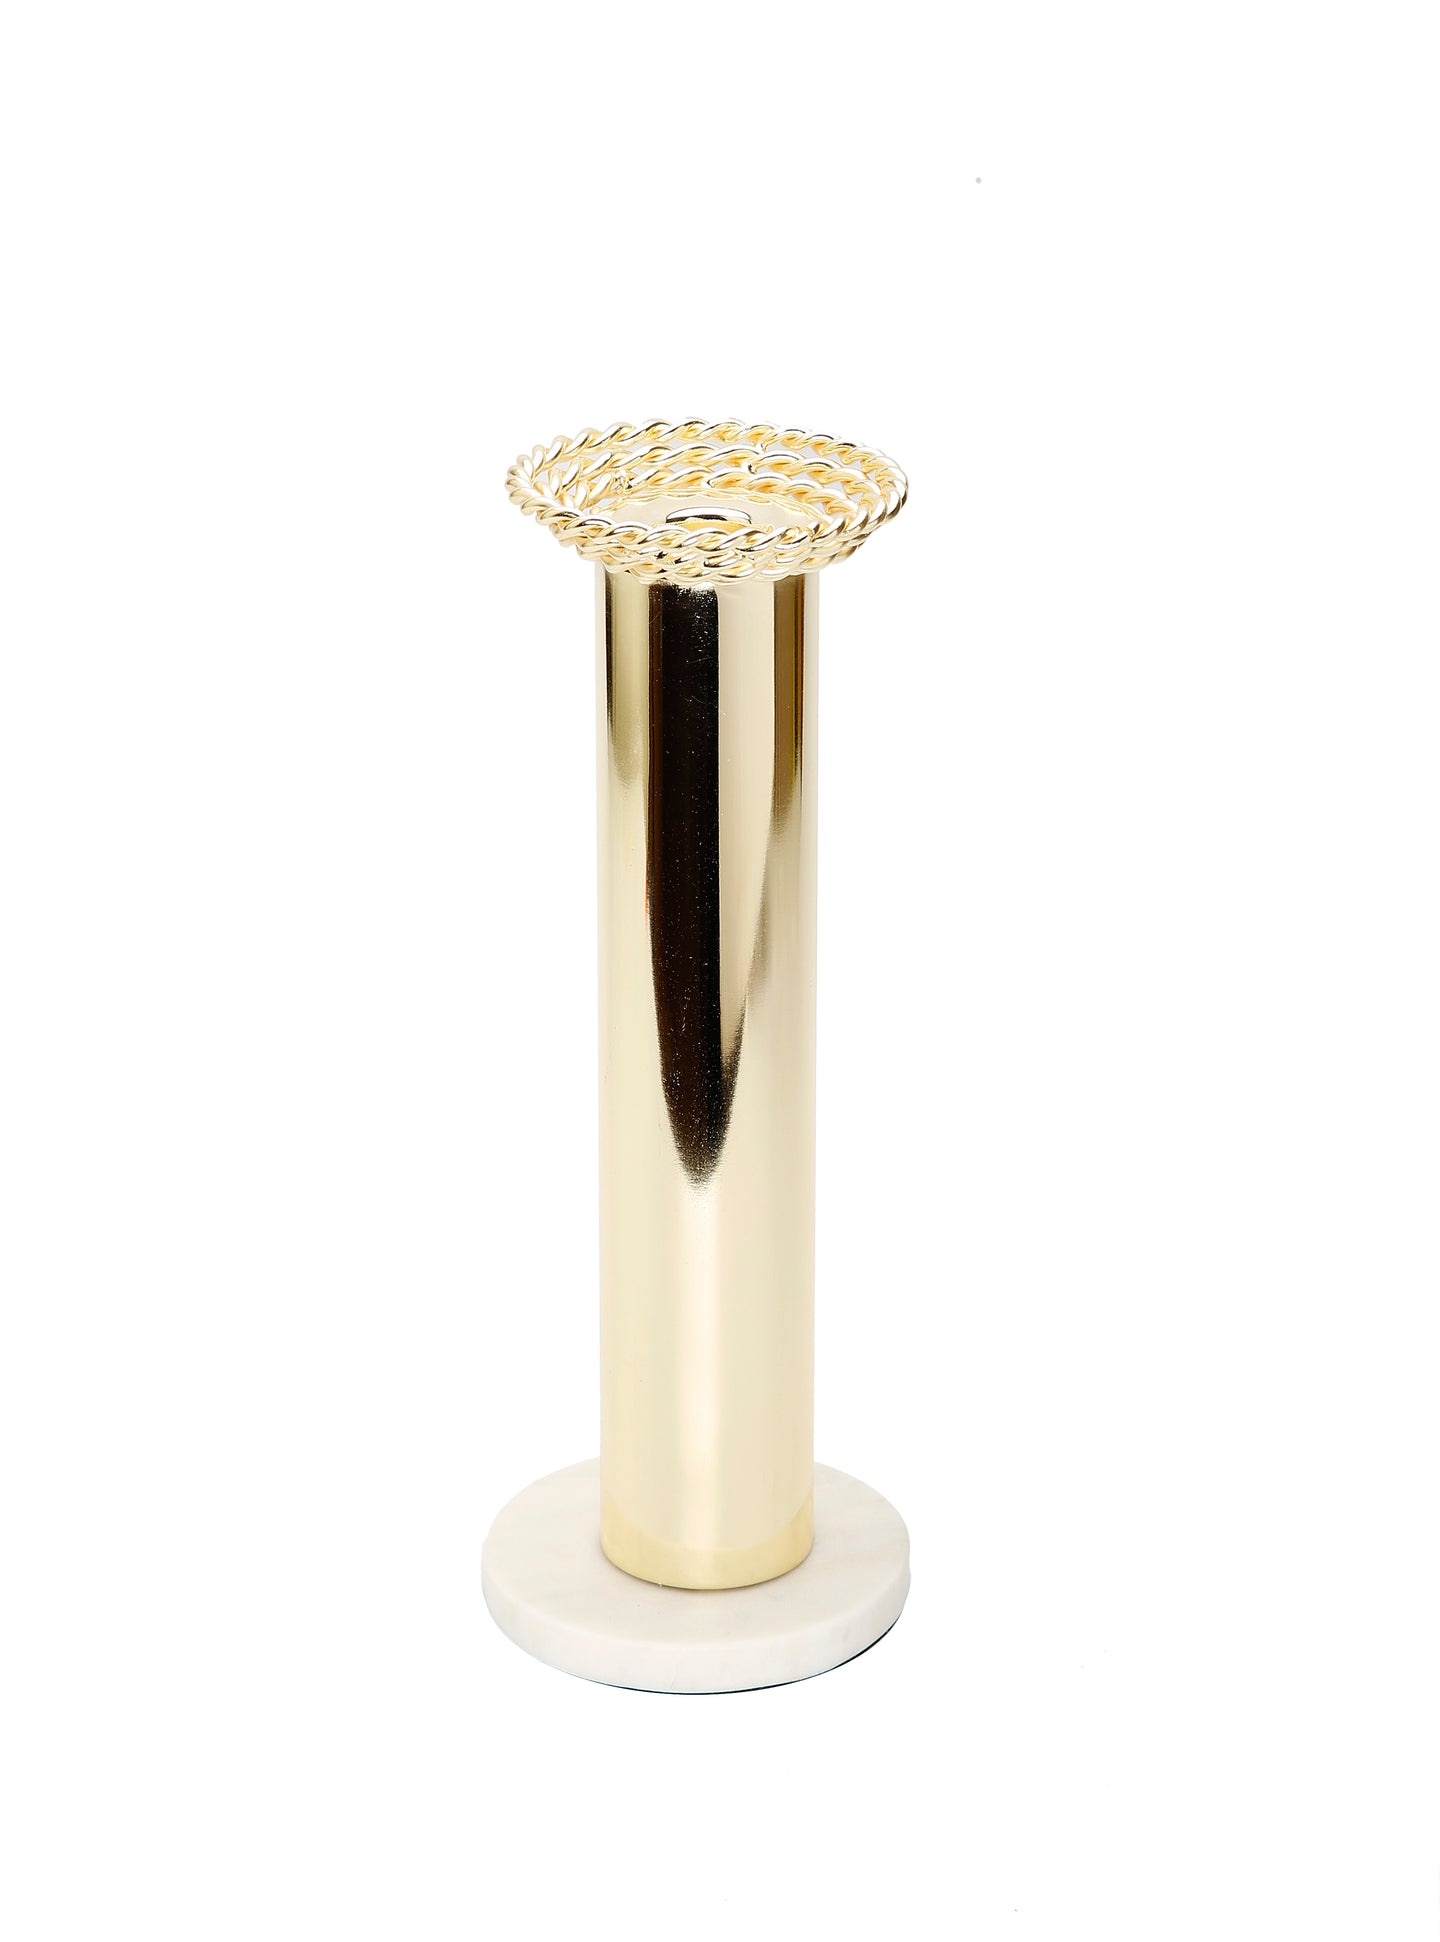 Gold Taper Candle Holder on Marble Base - 10.5